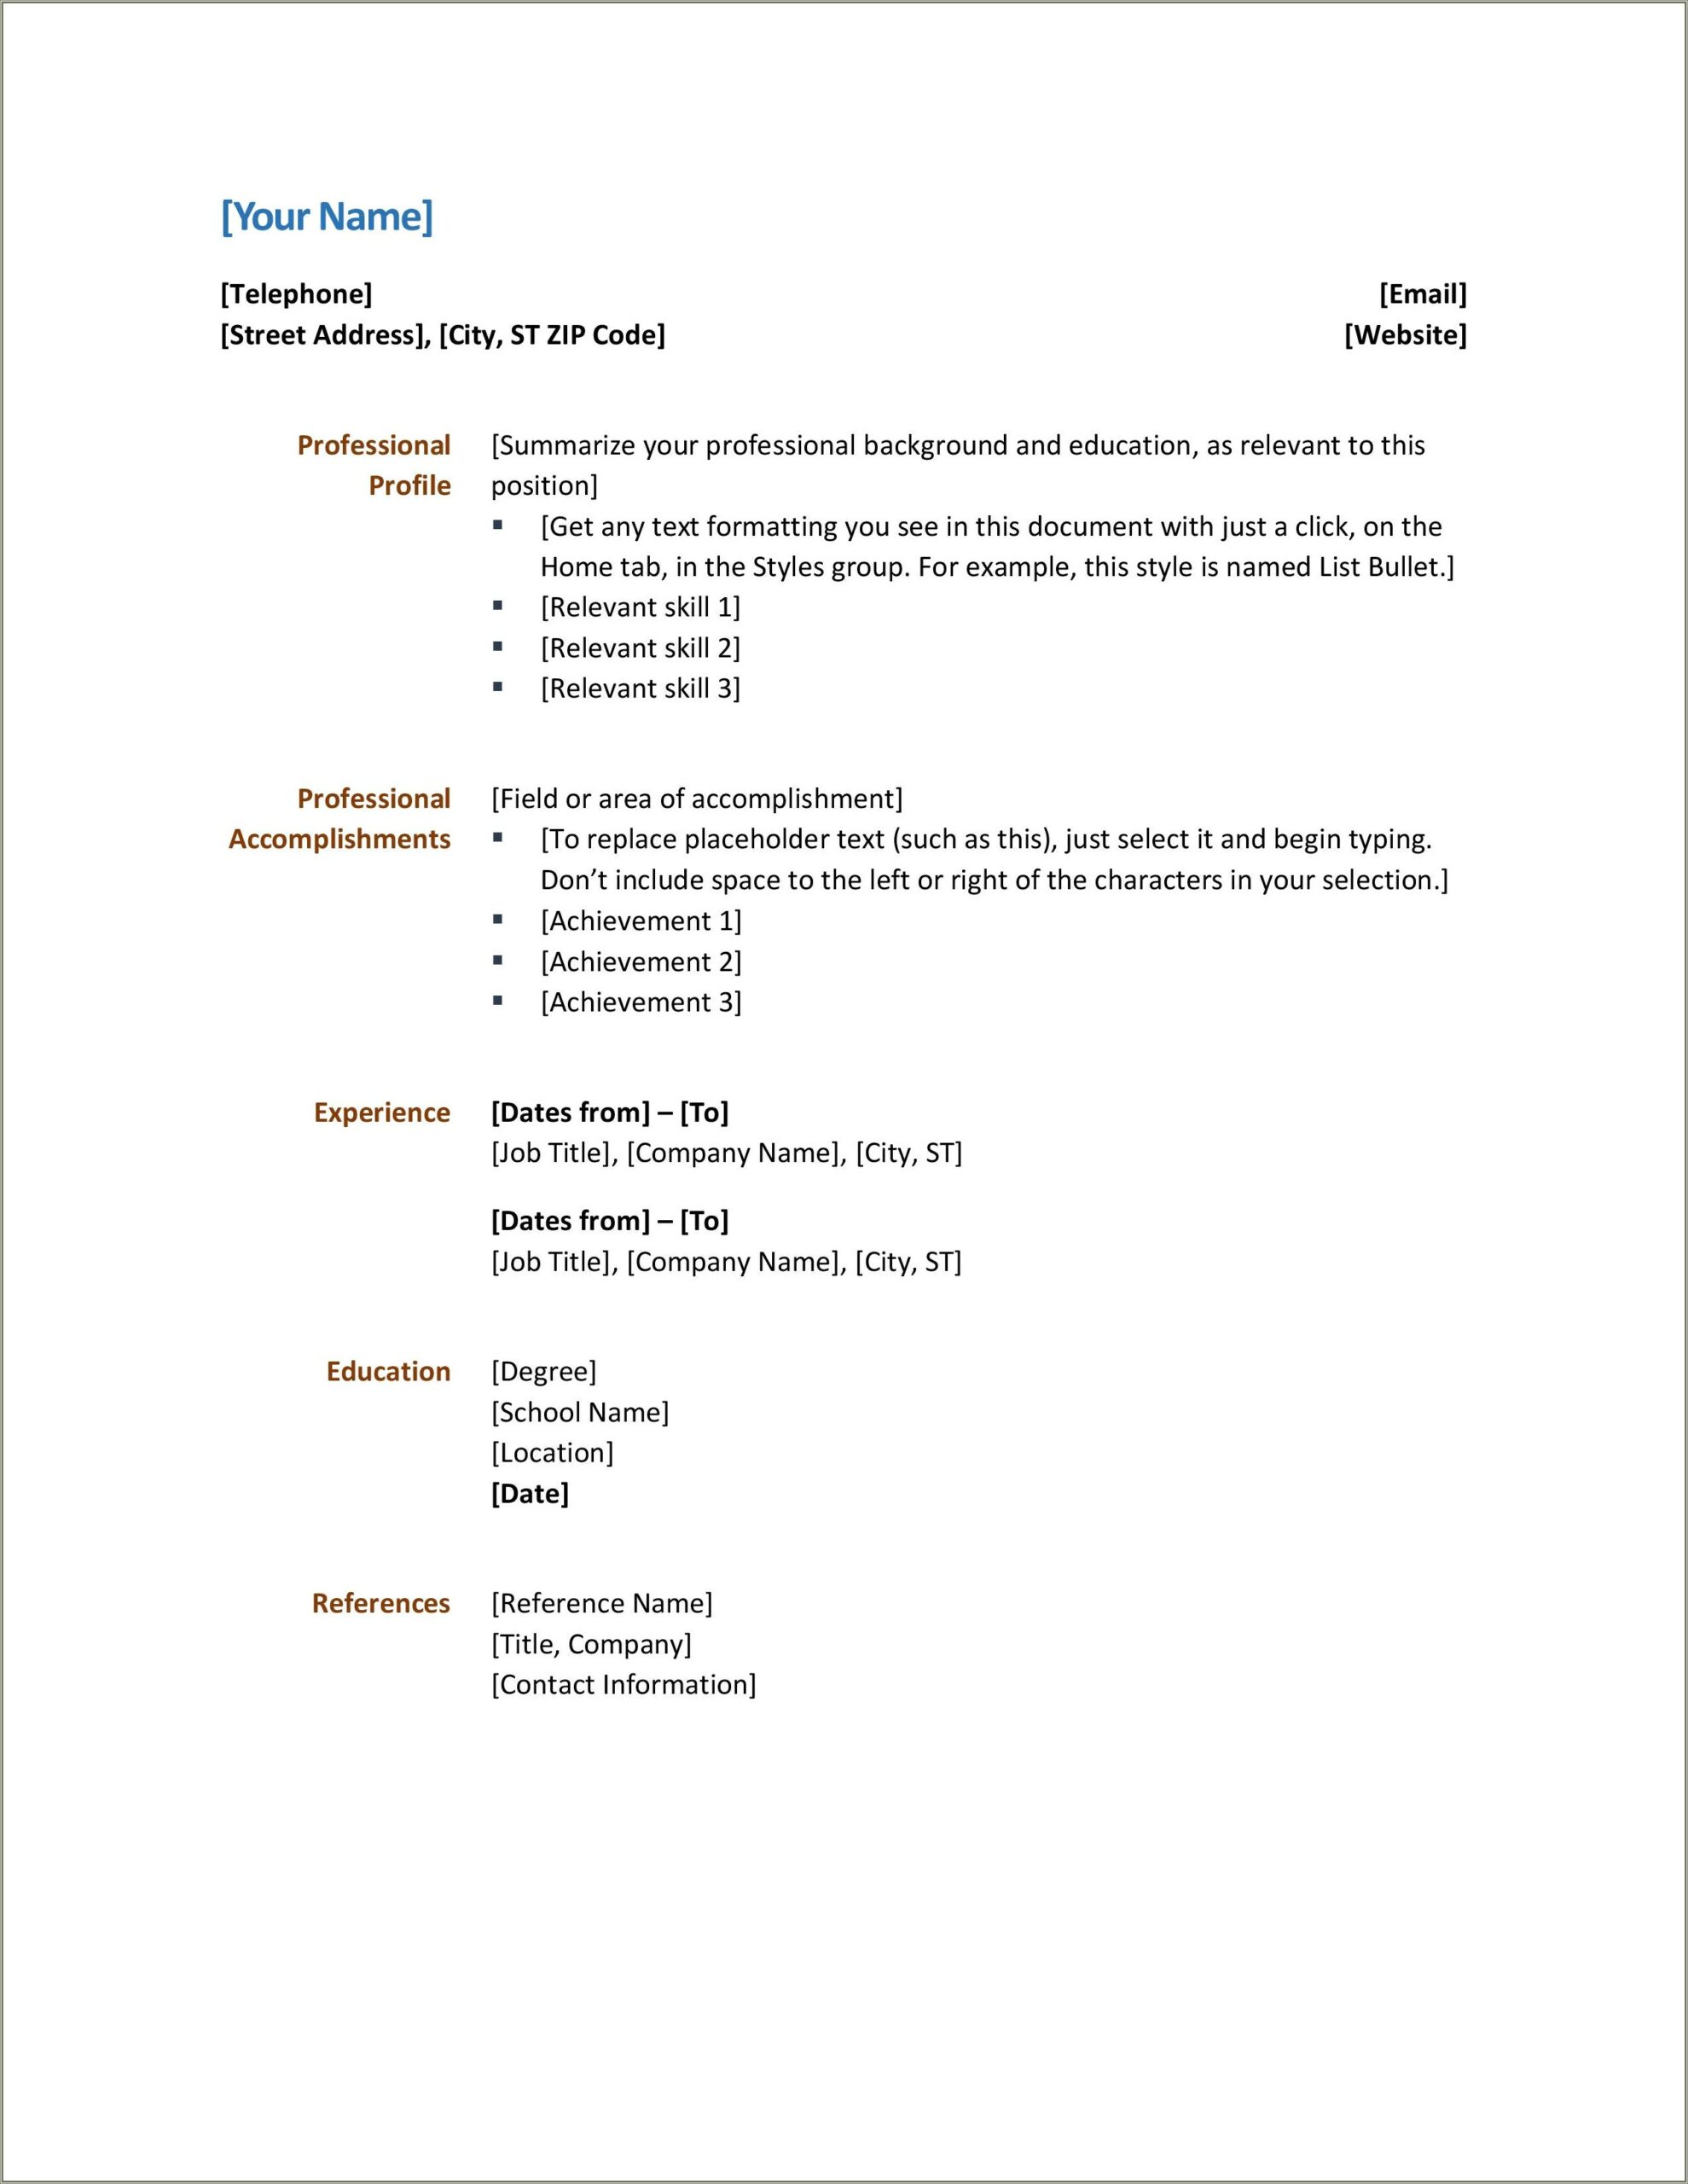 Resume Sample For Office Jobs For Students